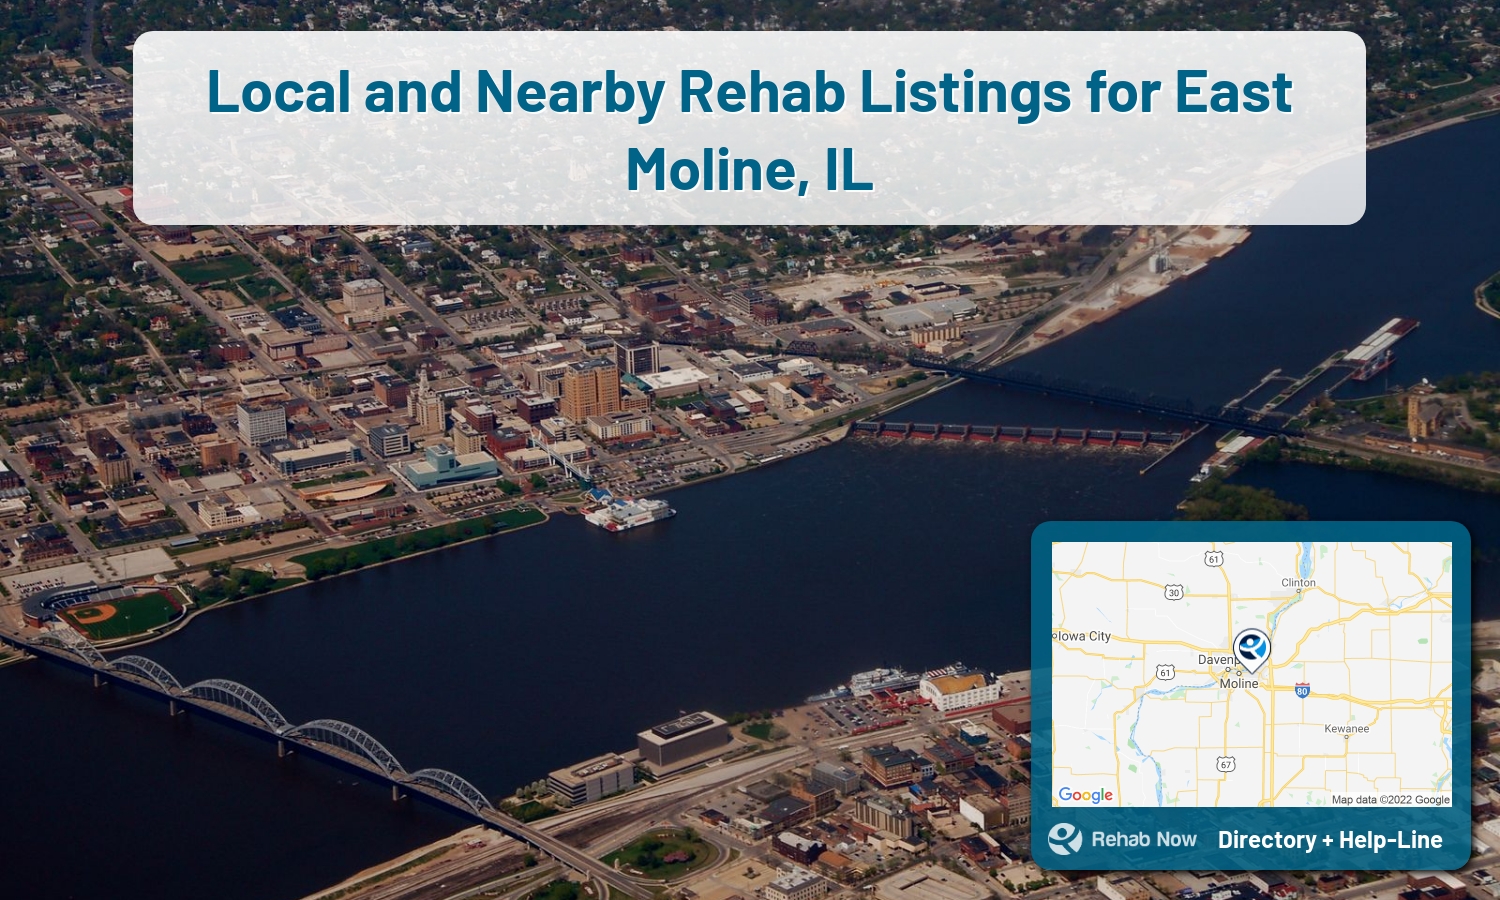 Our experts can help you find treatment now in East Moline, Illinois. We list drug rehab and alcohol centers in Illinois.